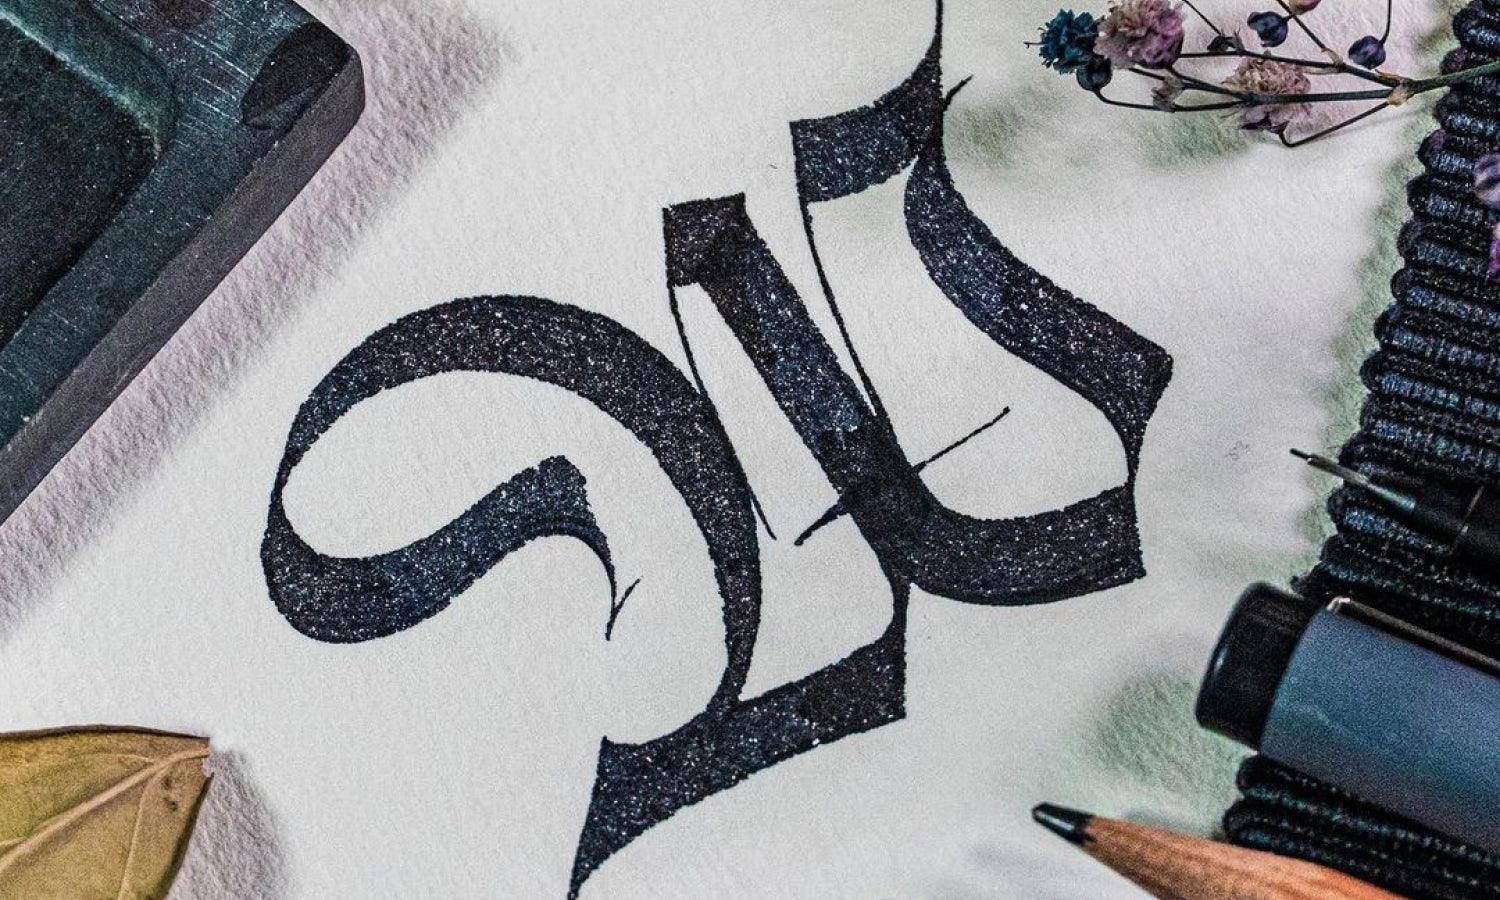 Modern Calligraphy on Cotton Paper - Tips and Tricks - Modern